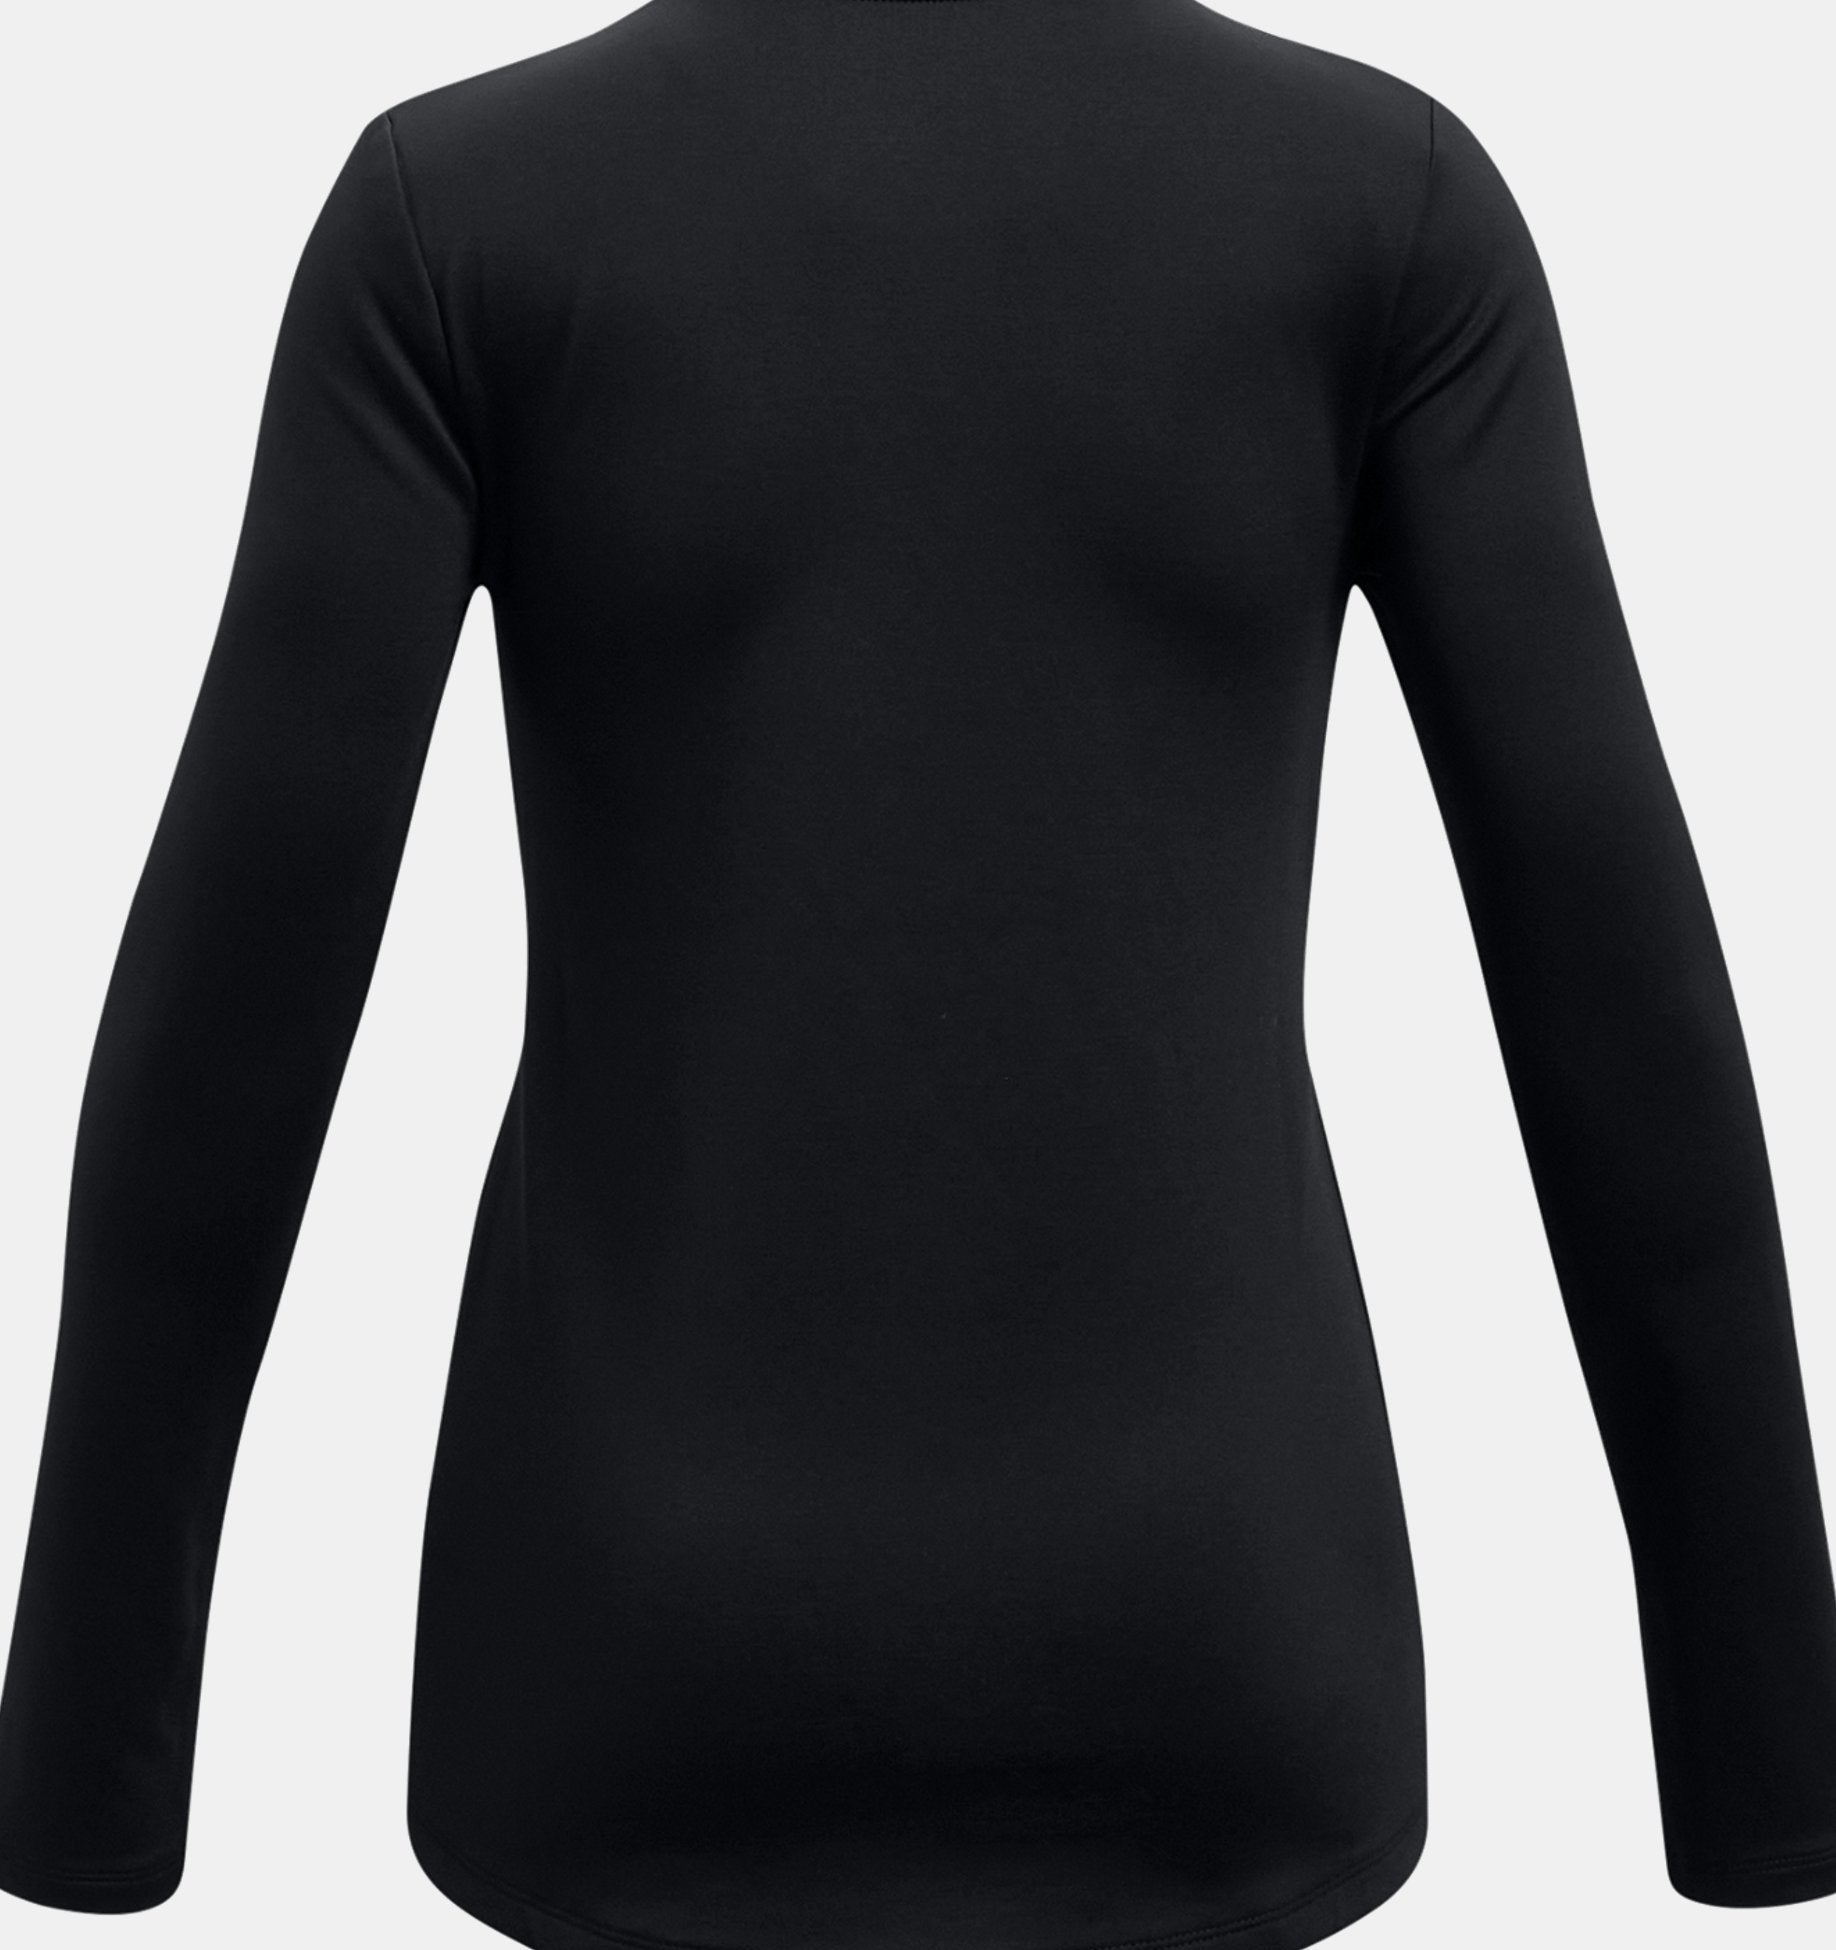 Under Armour Cold Gear Girl's Long Sleeve Crew Shirt-Sports Replay - Sports Excellence-Sports Replay - Sports Excellence